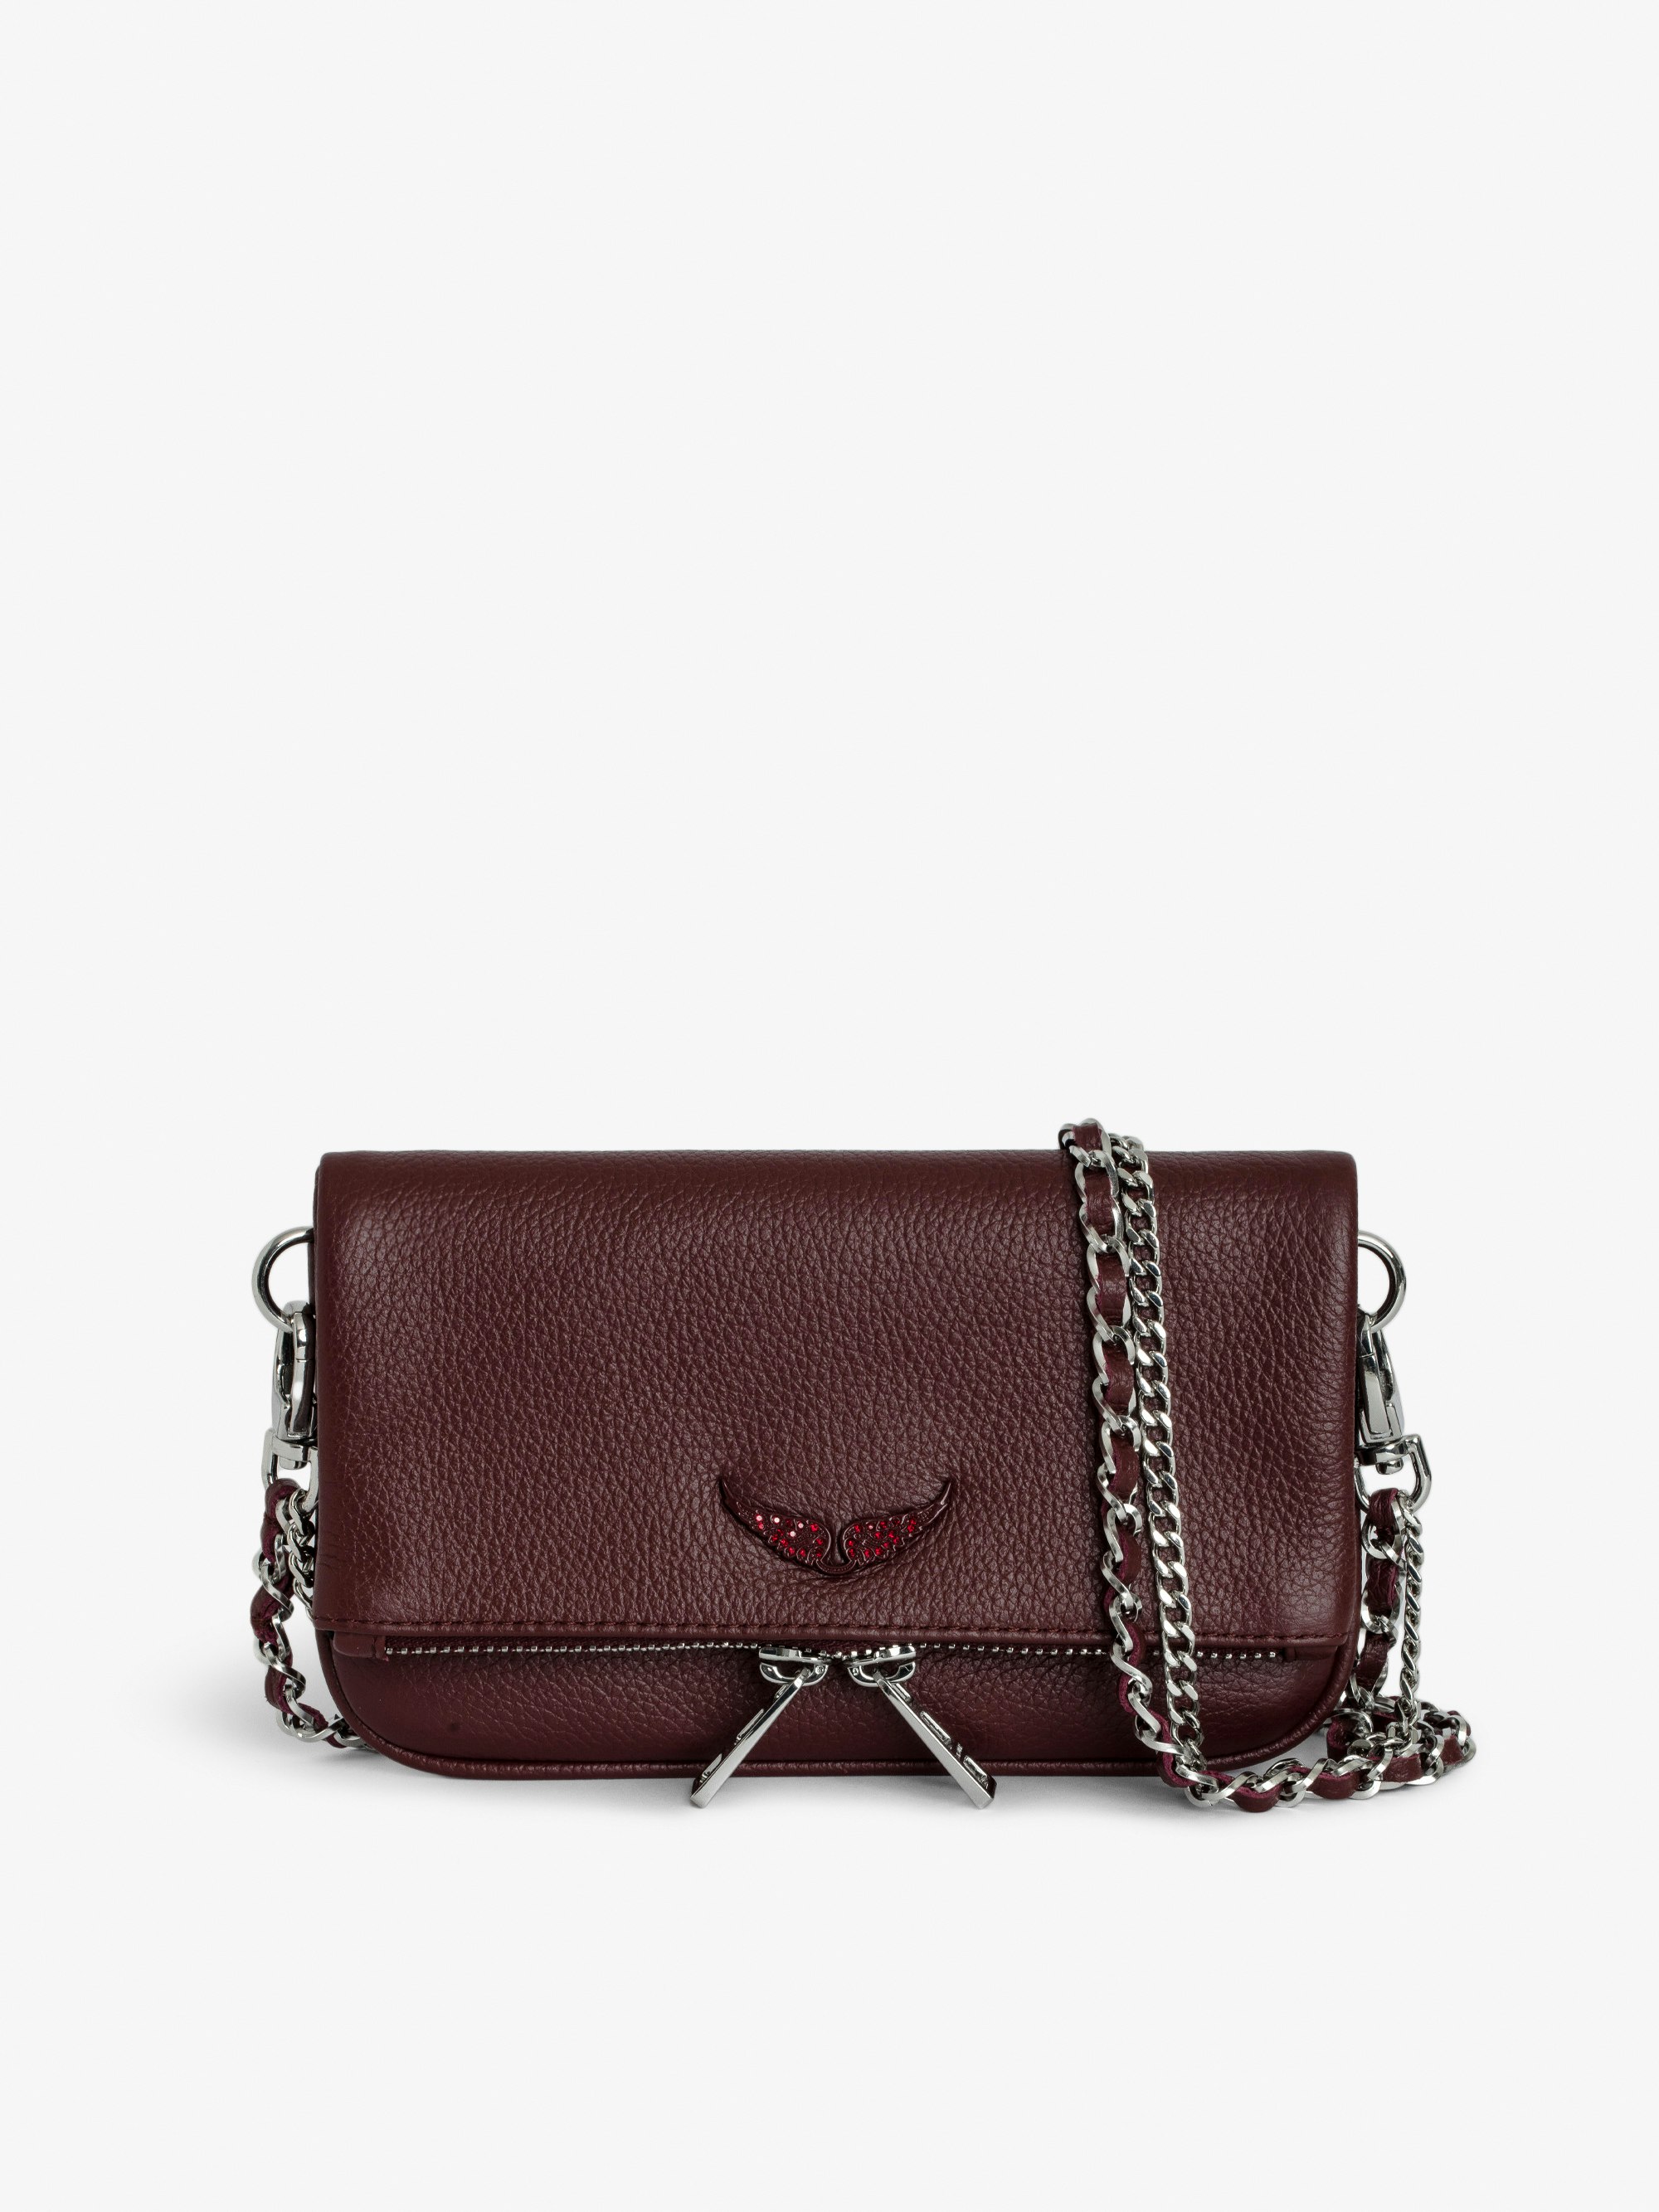 Rock Nano Clutch - Dark red small grained leather clutch with double leather and metal strap.